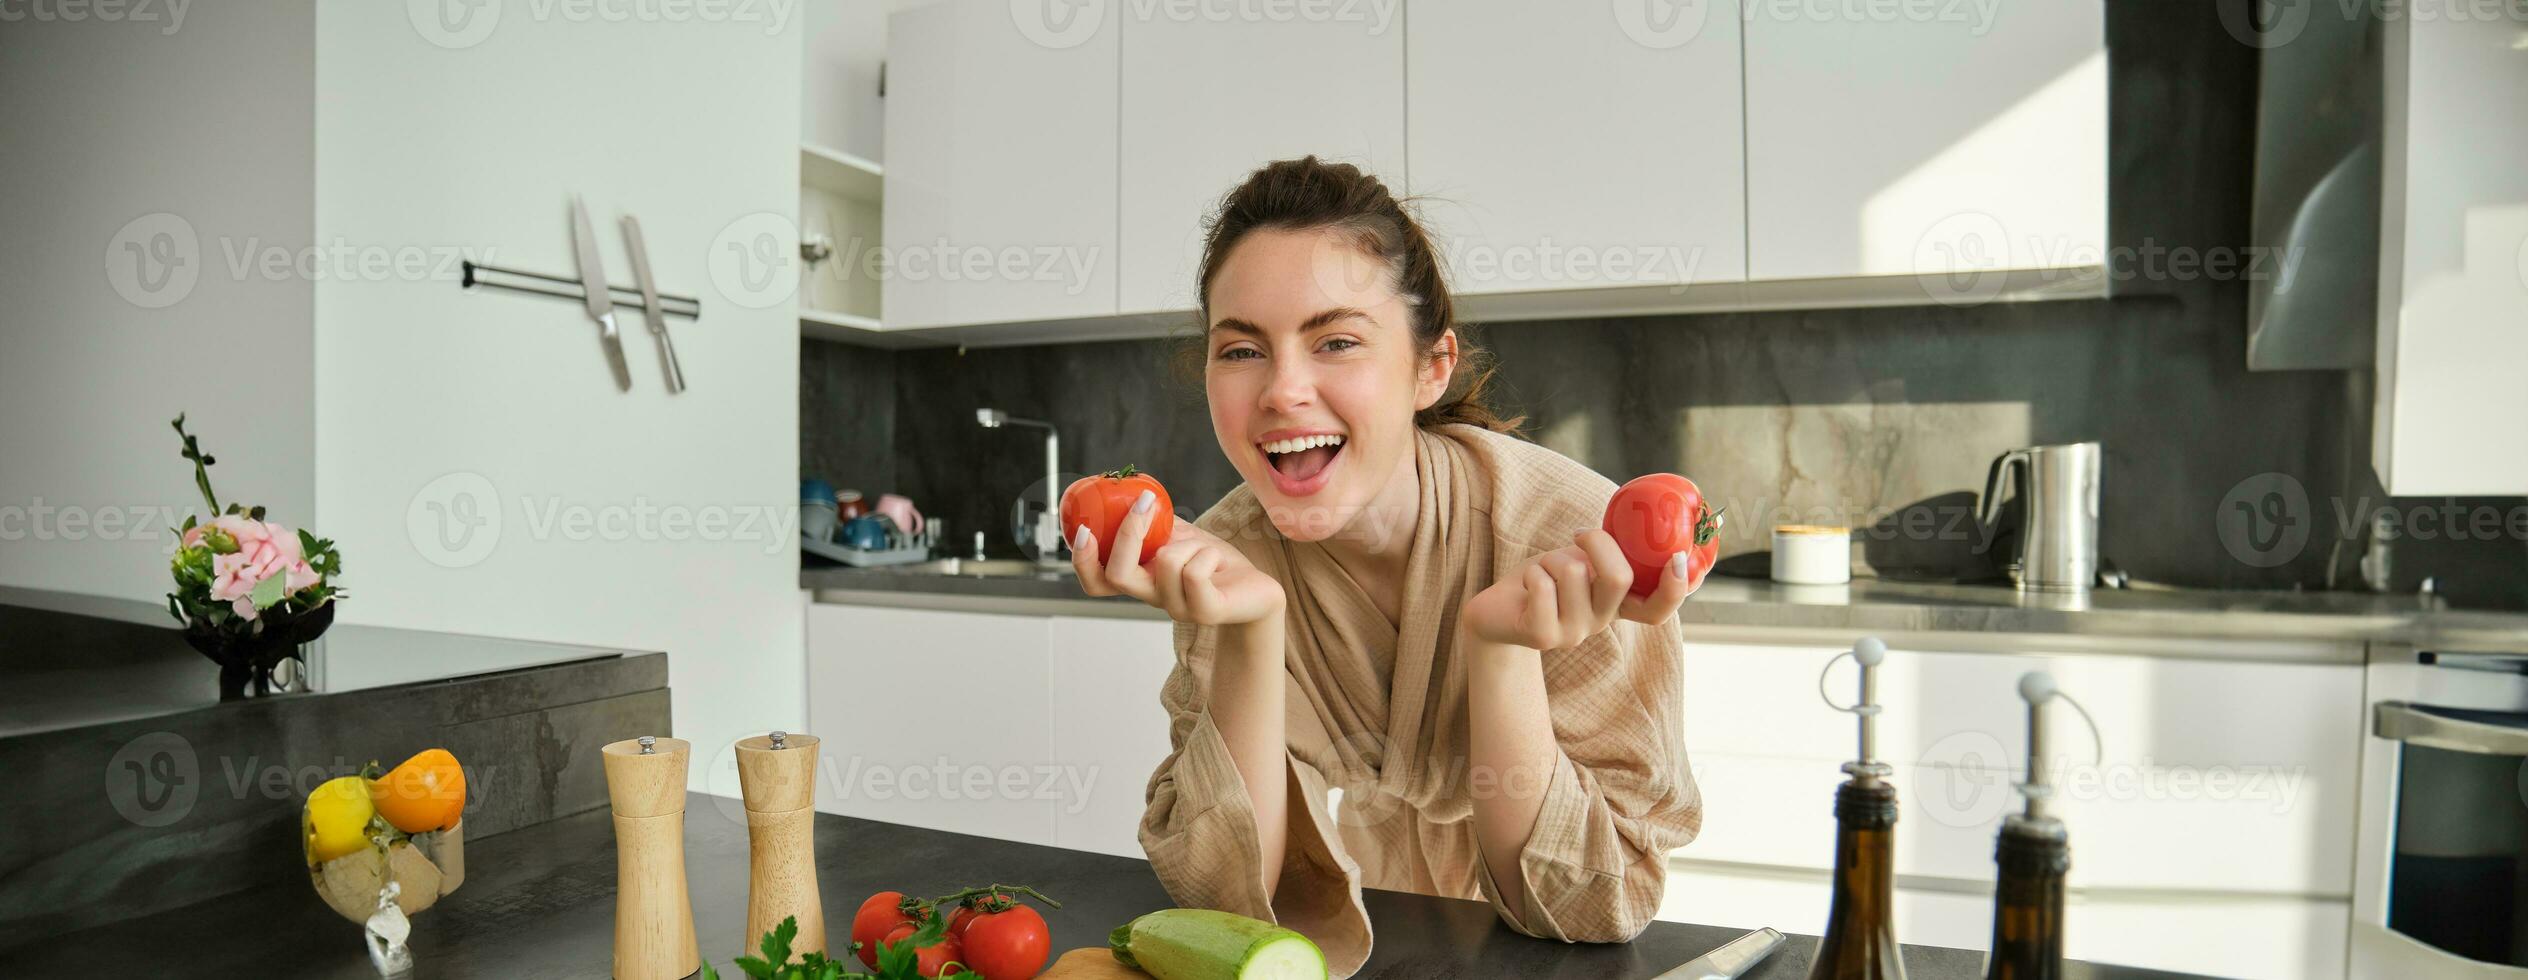 Portrait of beautiful woman cooking in the kitchen, chopping vegetables on board, holding tomatoes, lead healthy lifestyle with preparing fresh salads, vegan meals photo